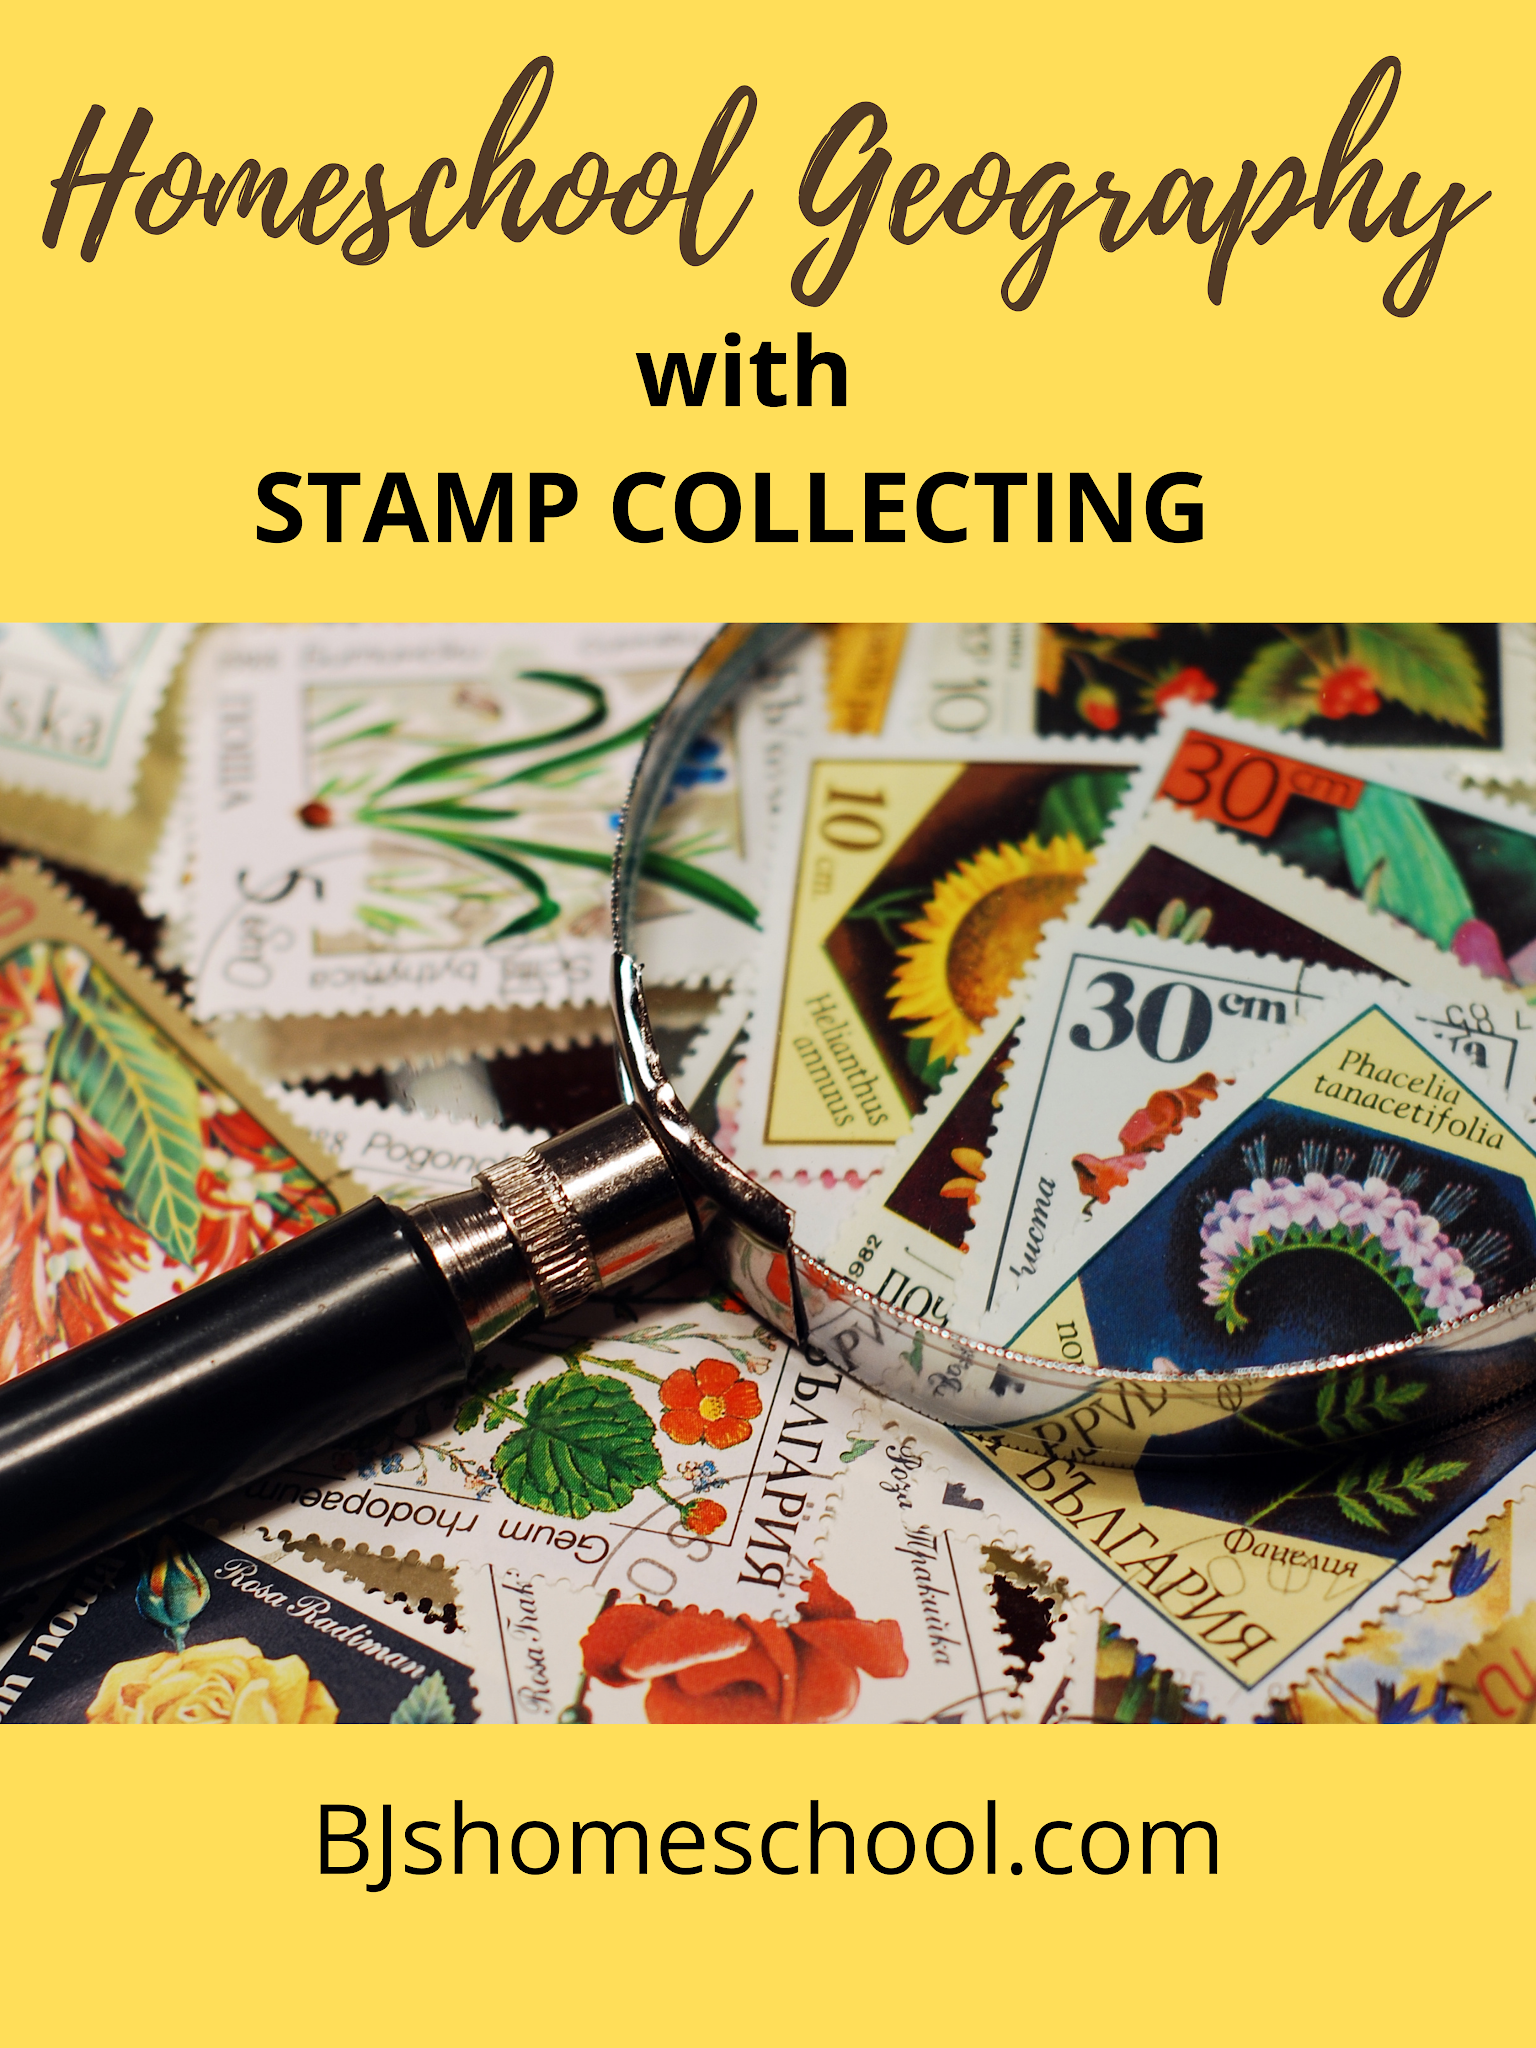 BJ's Homeschool : Homeschool Geography with Stamp Collecting for Kids - A  Simple Unit Study